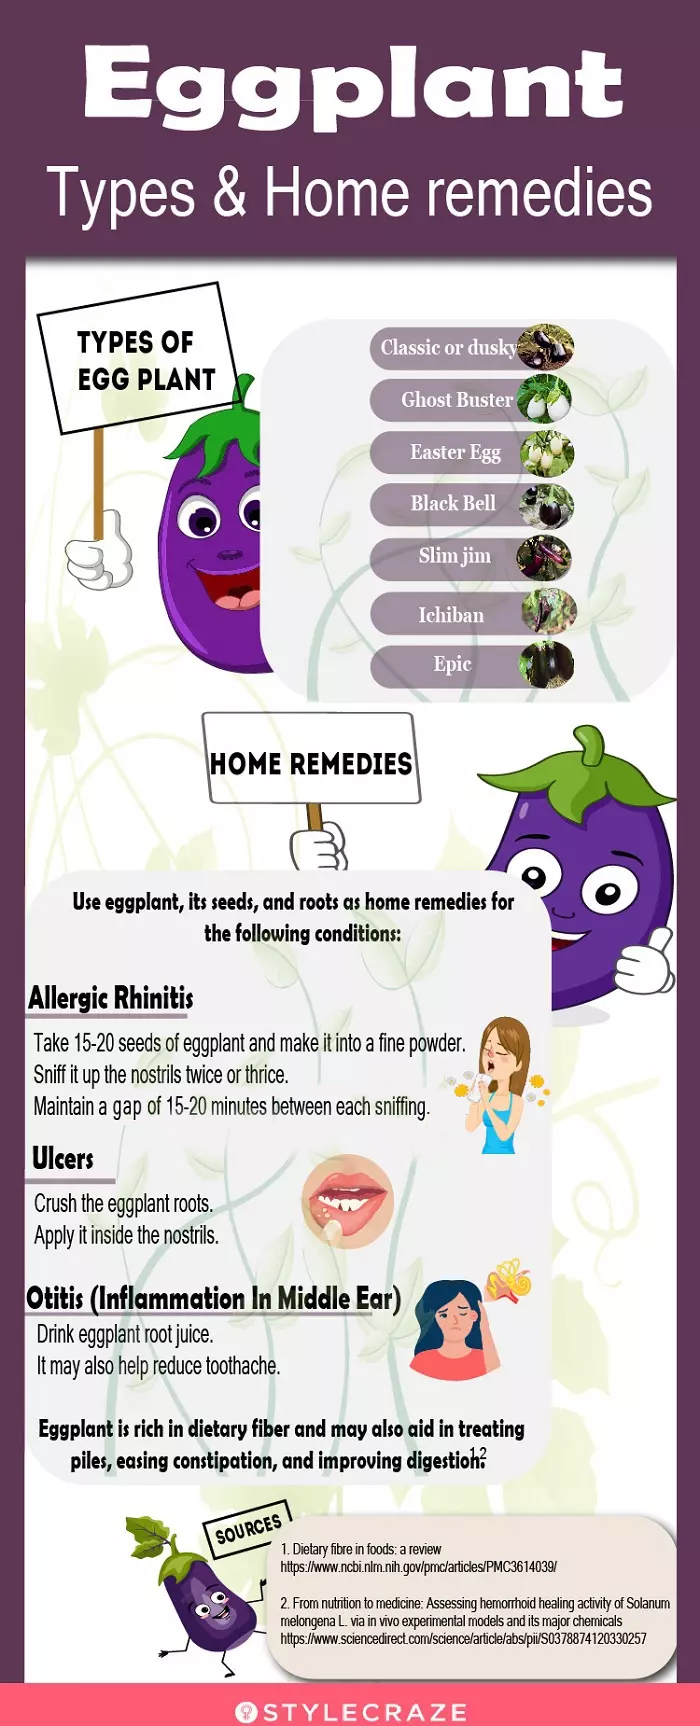 egg plant types and home remedies (infographic)